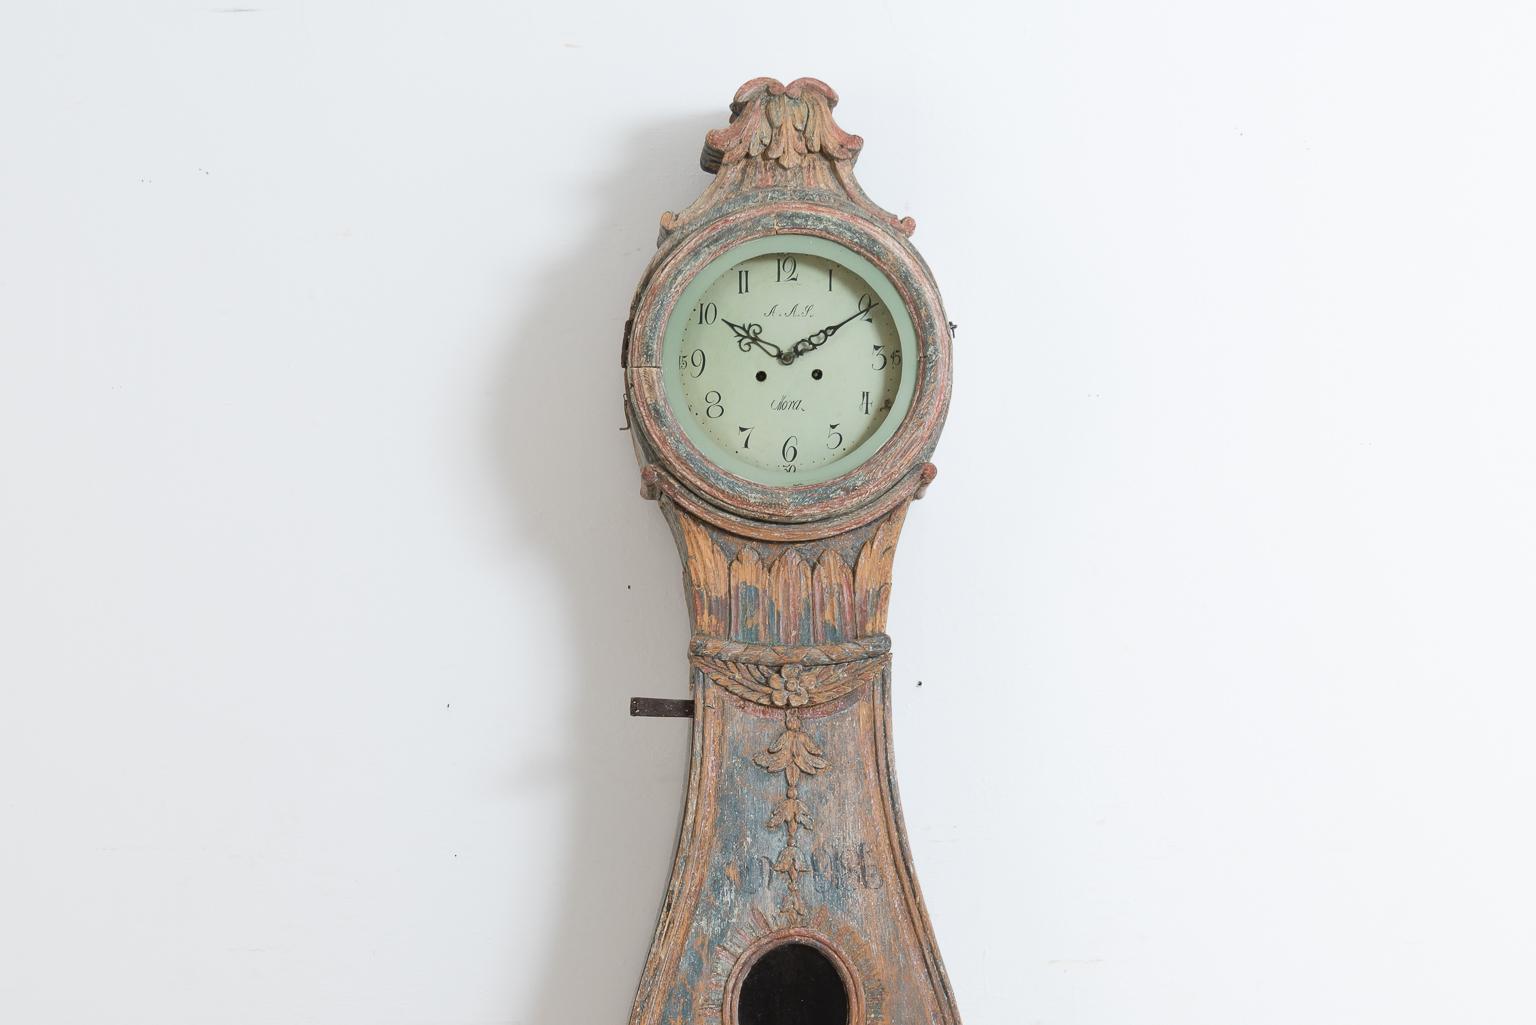 Unusual long case clock from Hälsingland in northern Sweden. The clock is from a smaller village called Ljusdal in the county of Hälsingland. Manufactured circa 1790 and scraped to the original blue 18th century paint.

The long case clock is very